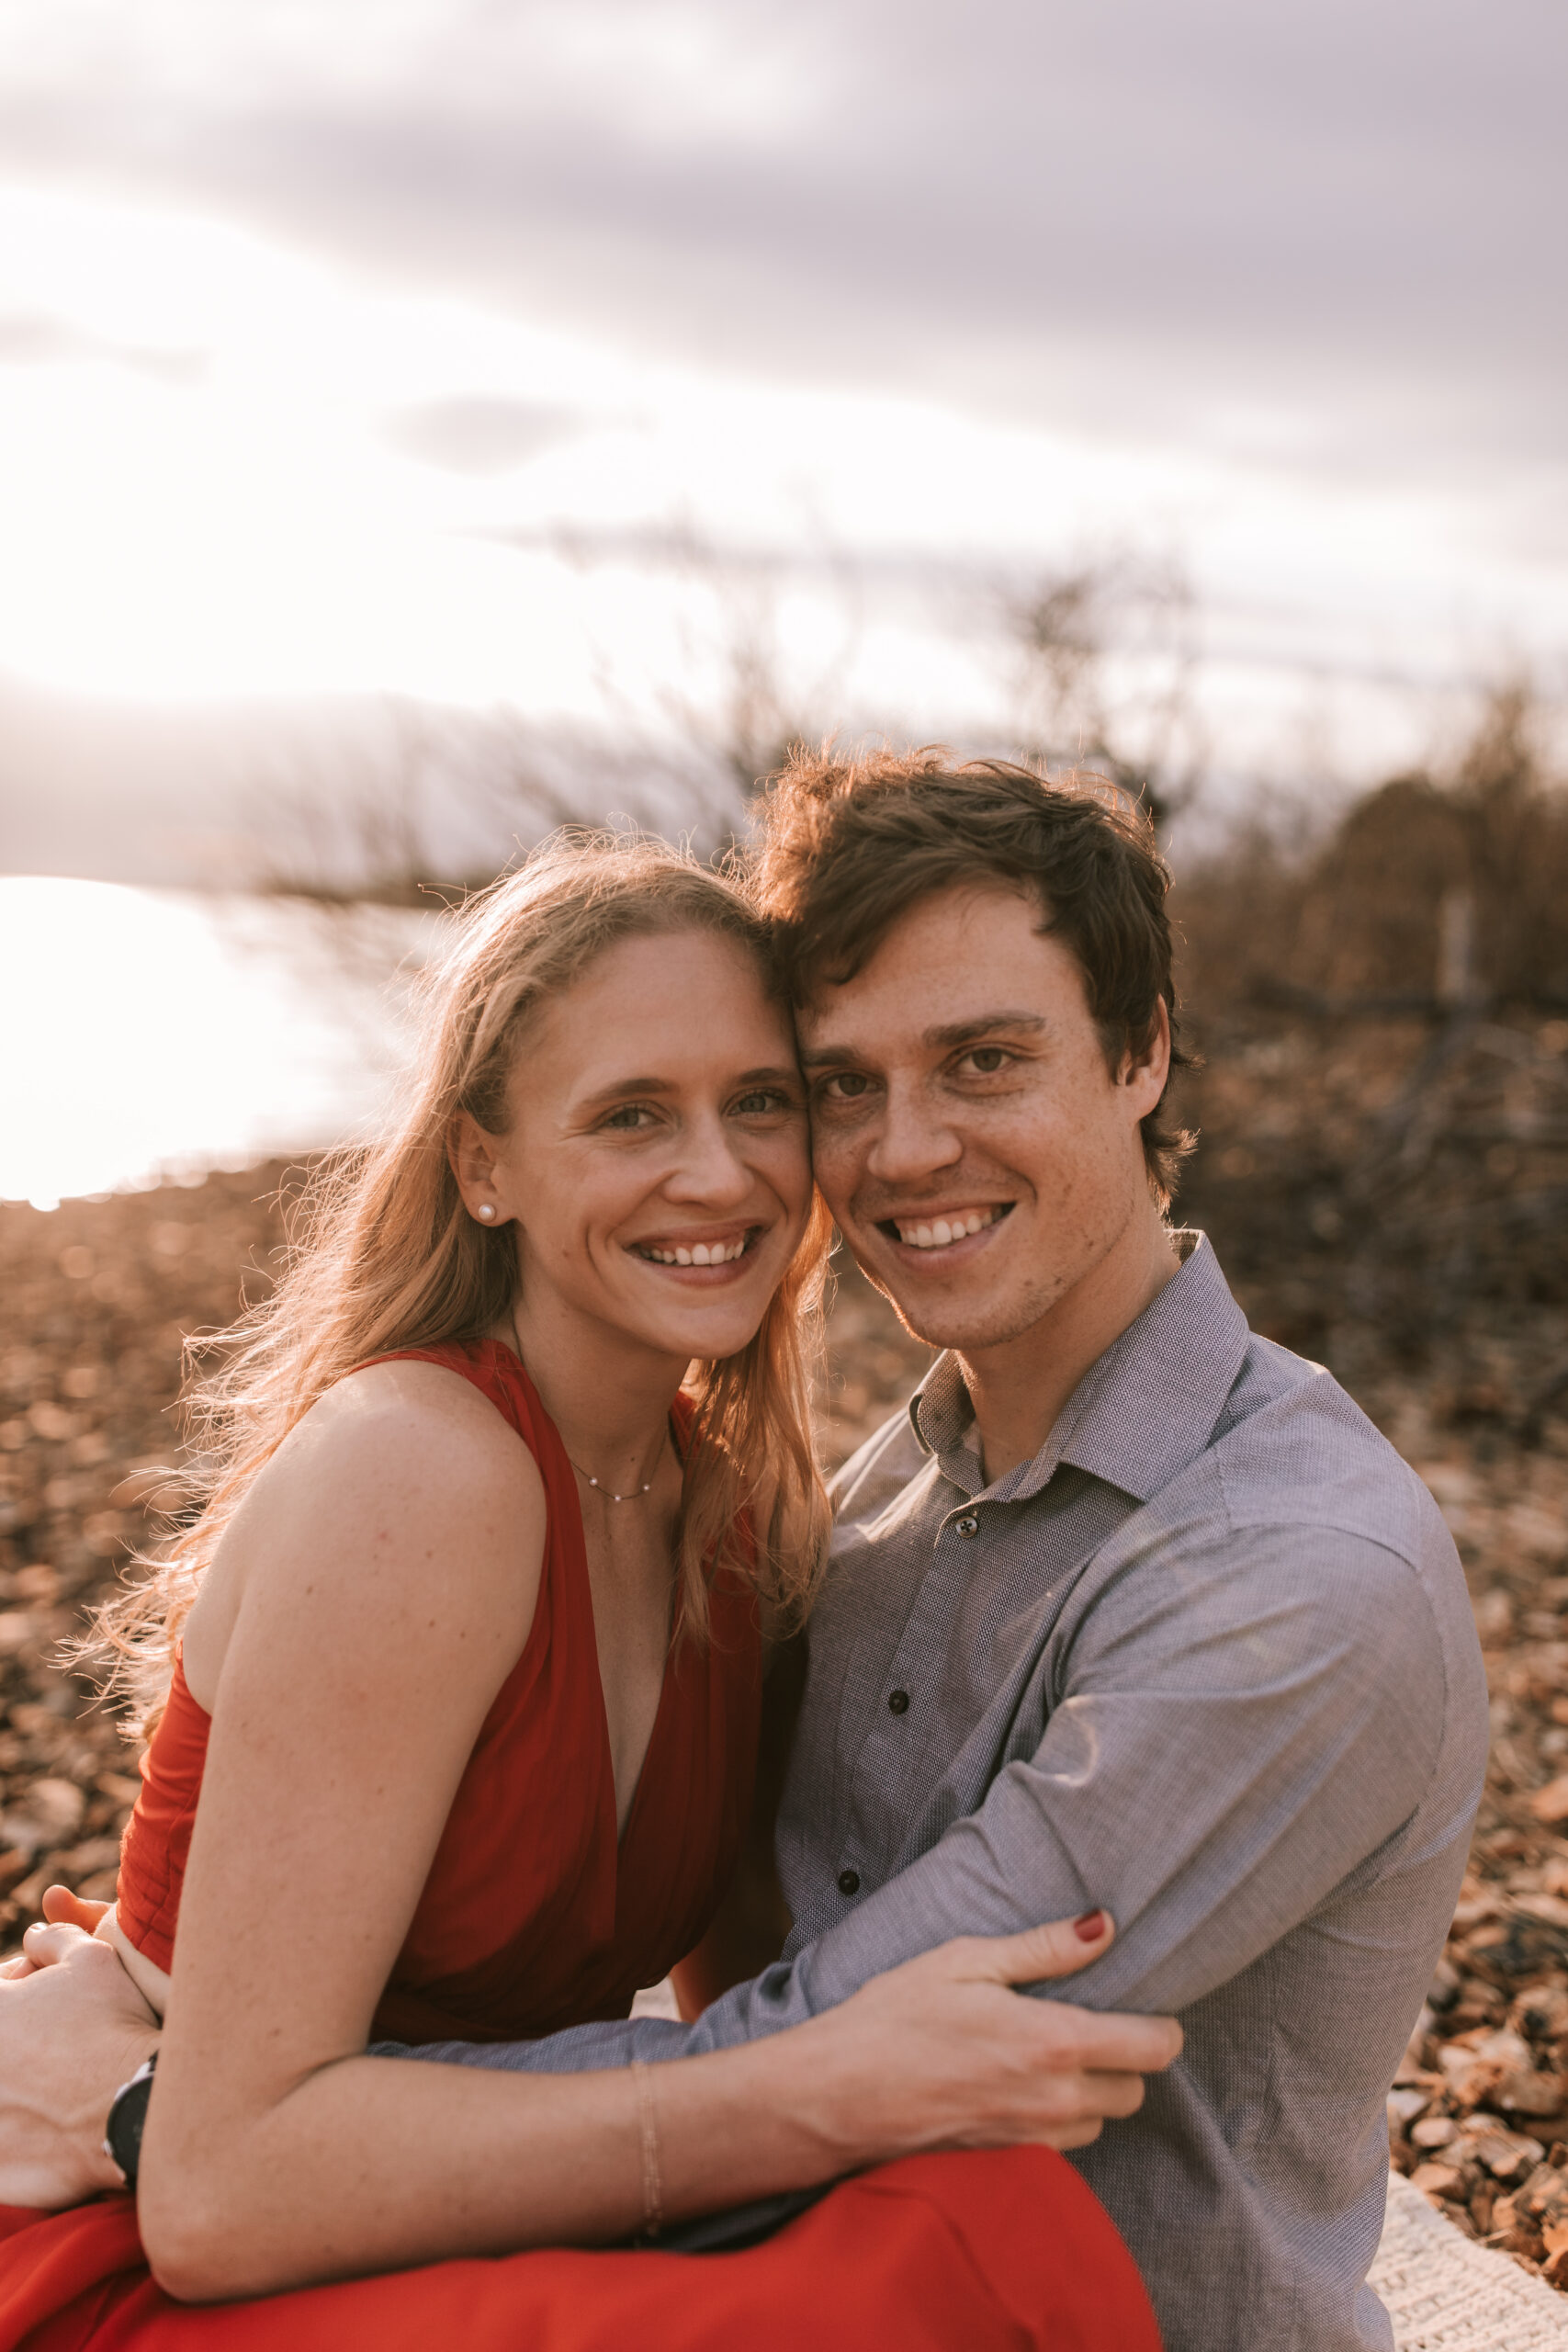 Engagement photo on a river bed in Missouri by Bailey Morris Photography. Bride is wearing a sleeveless, red, casual gown and groom is wearing a gray button down shirt.
